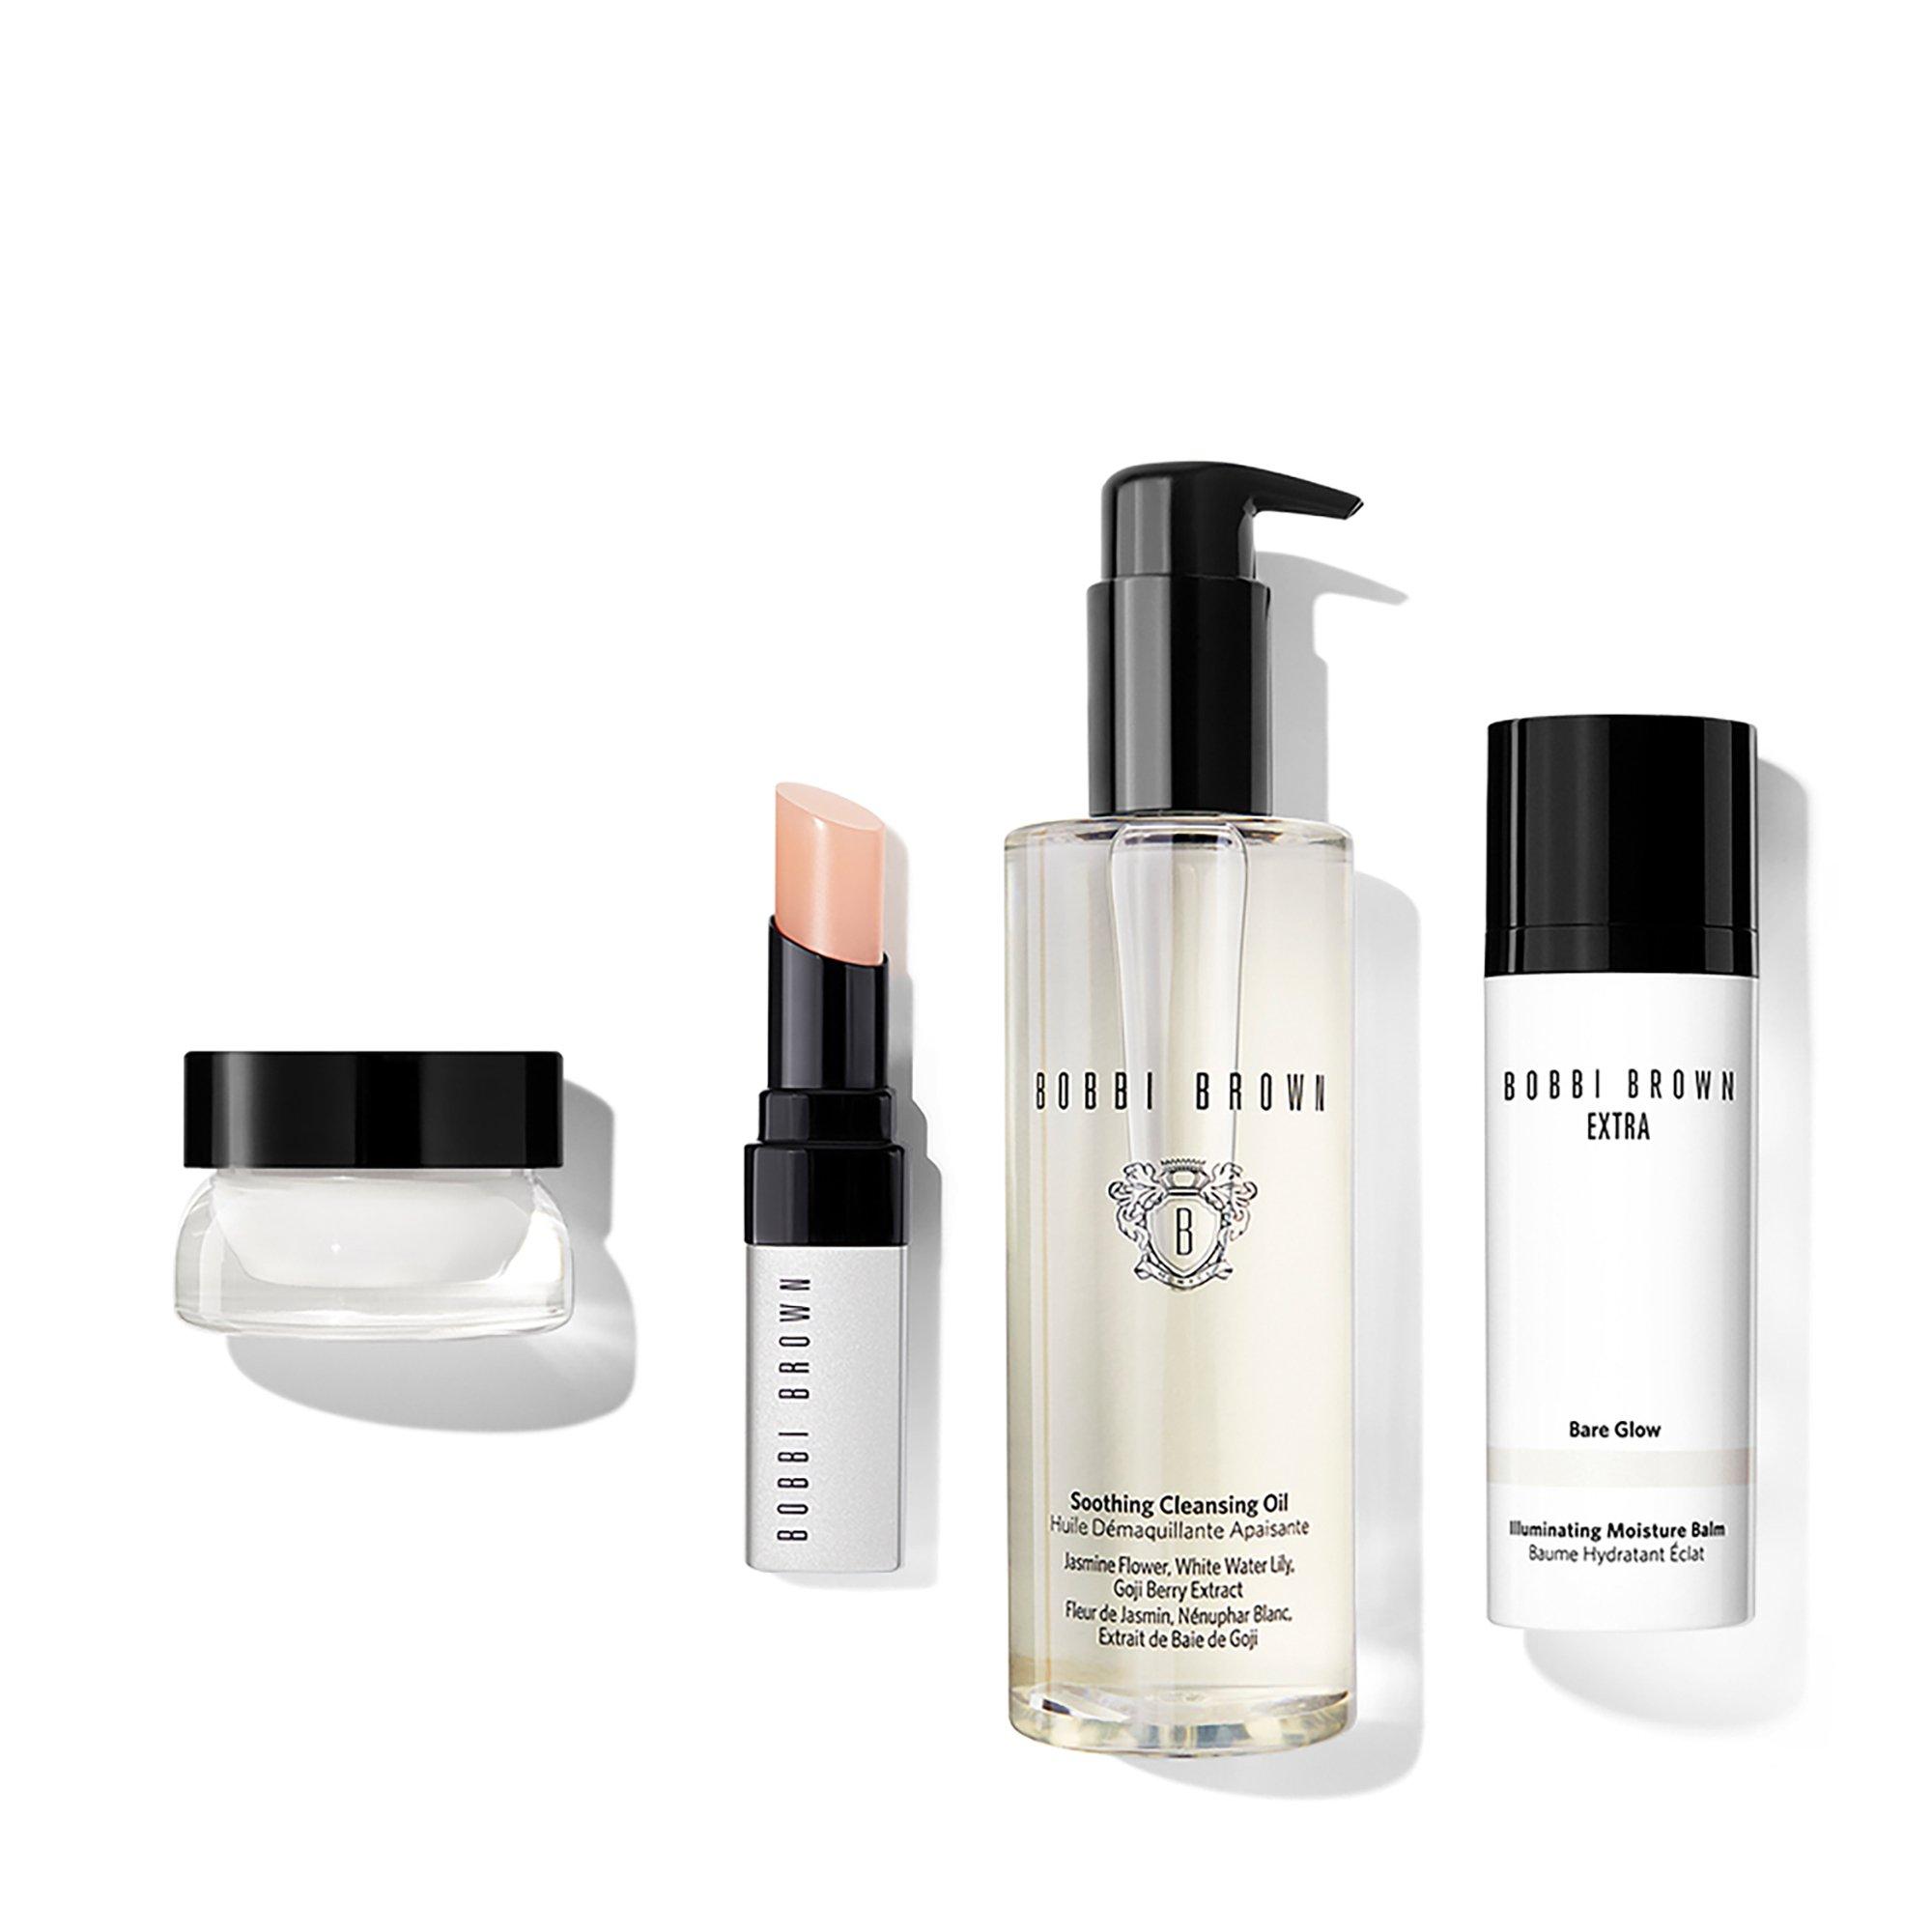 Image of BOBBI BROWN Cleanse and Care Extra Skincare Set - Set